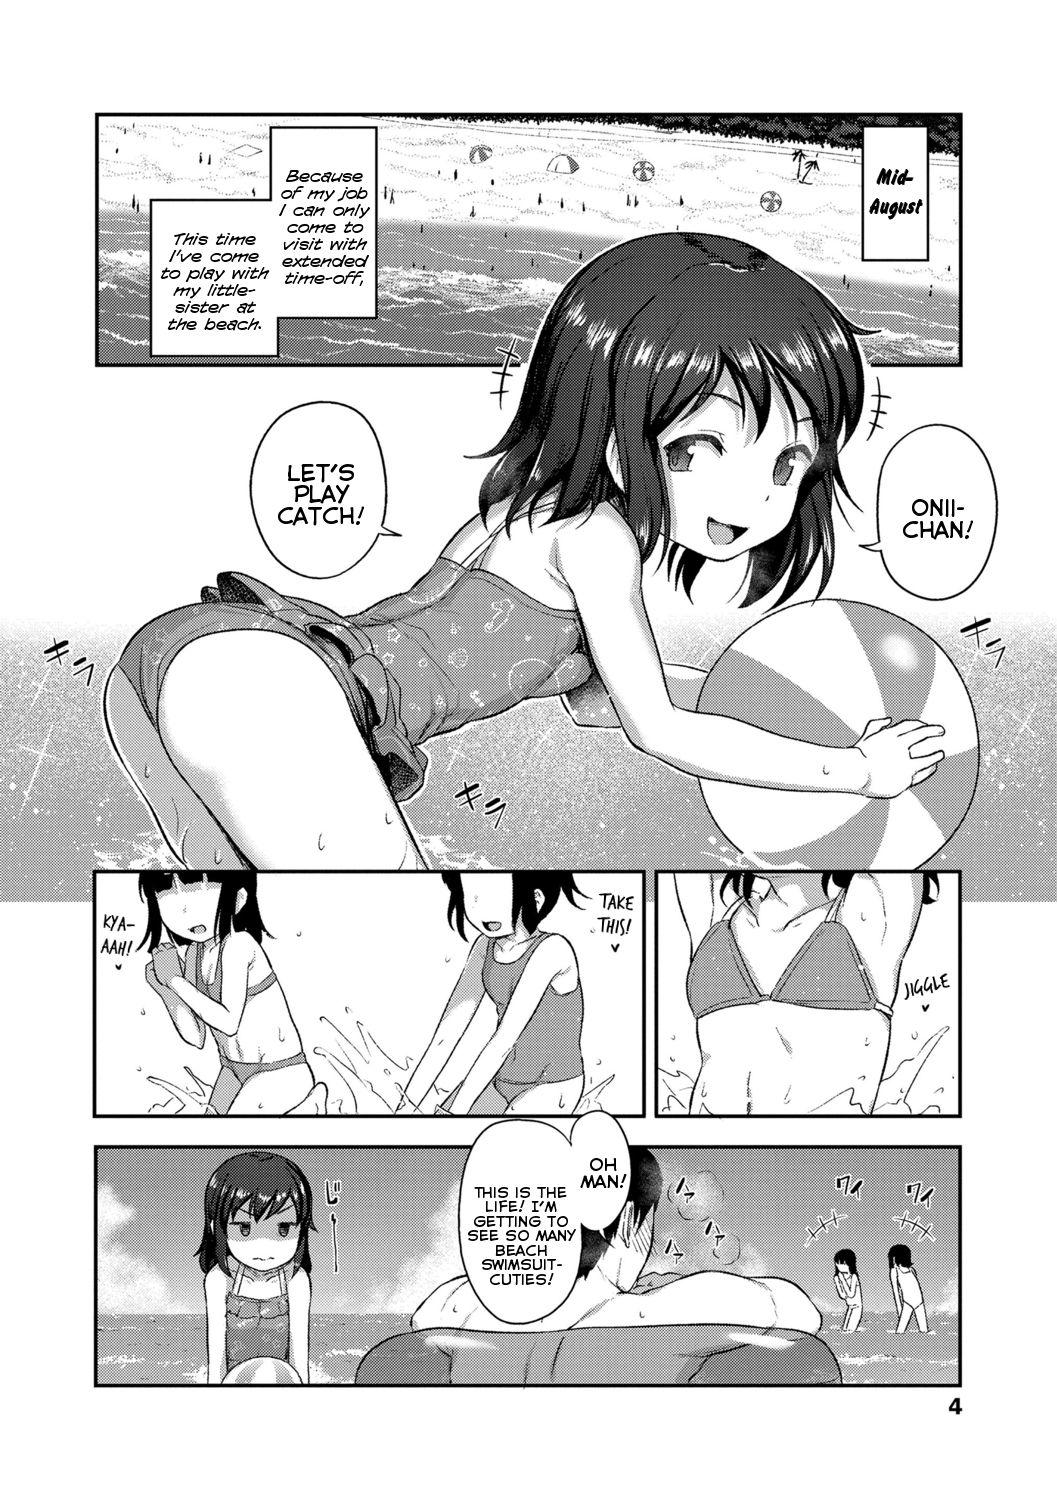 Sweet [Hayake] Imouto no Hadaka o Mite Koufun Suru nante Hen na Onii-chan | What Kind of Weirdo Onii-chan Gets Excited From Seeing His Little Sister Naked? [English] [Mistvern + Shippoyasha] [Digital] Sixtynine - Page 6